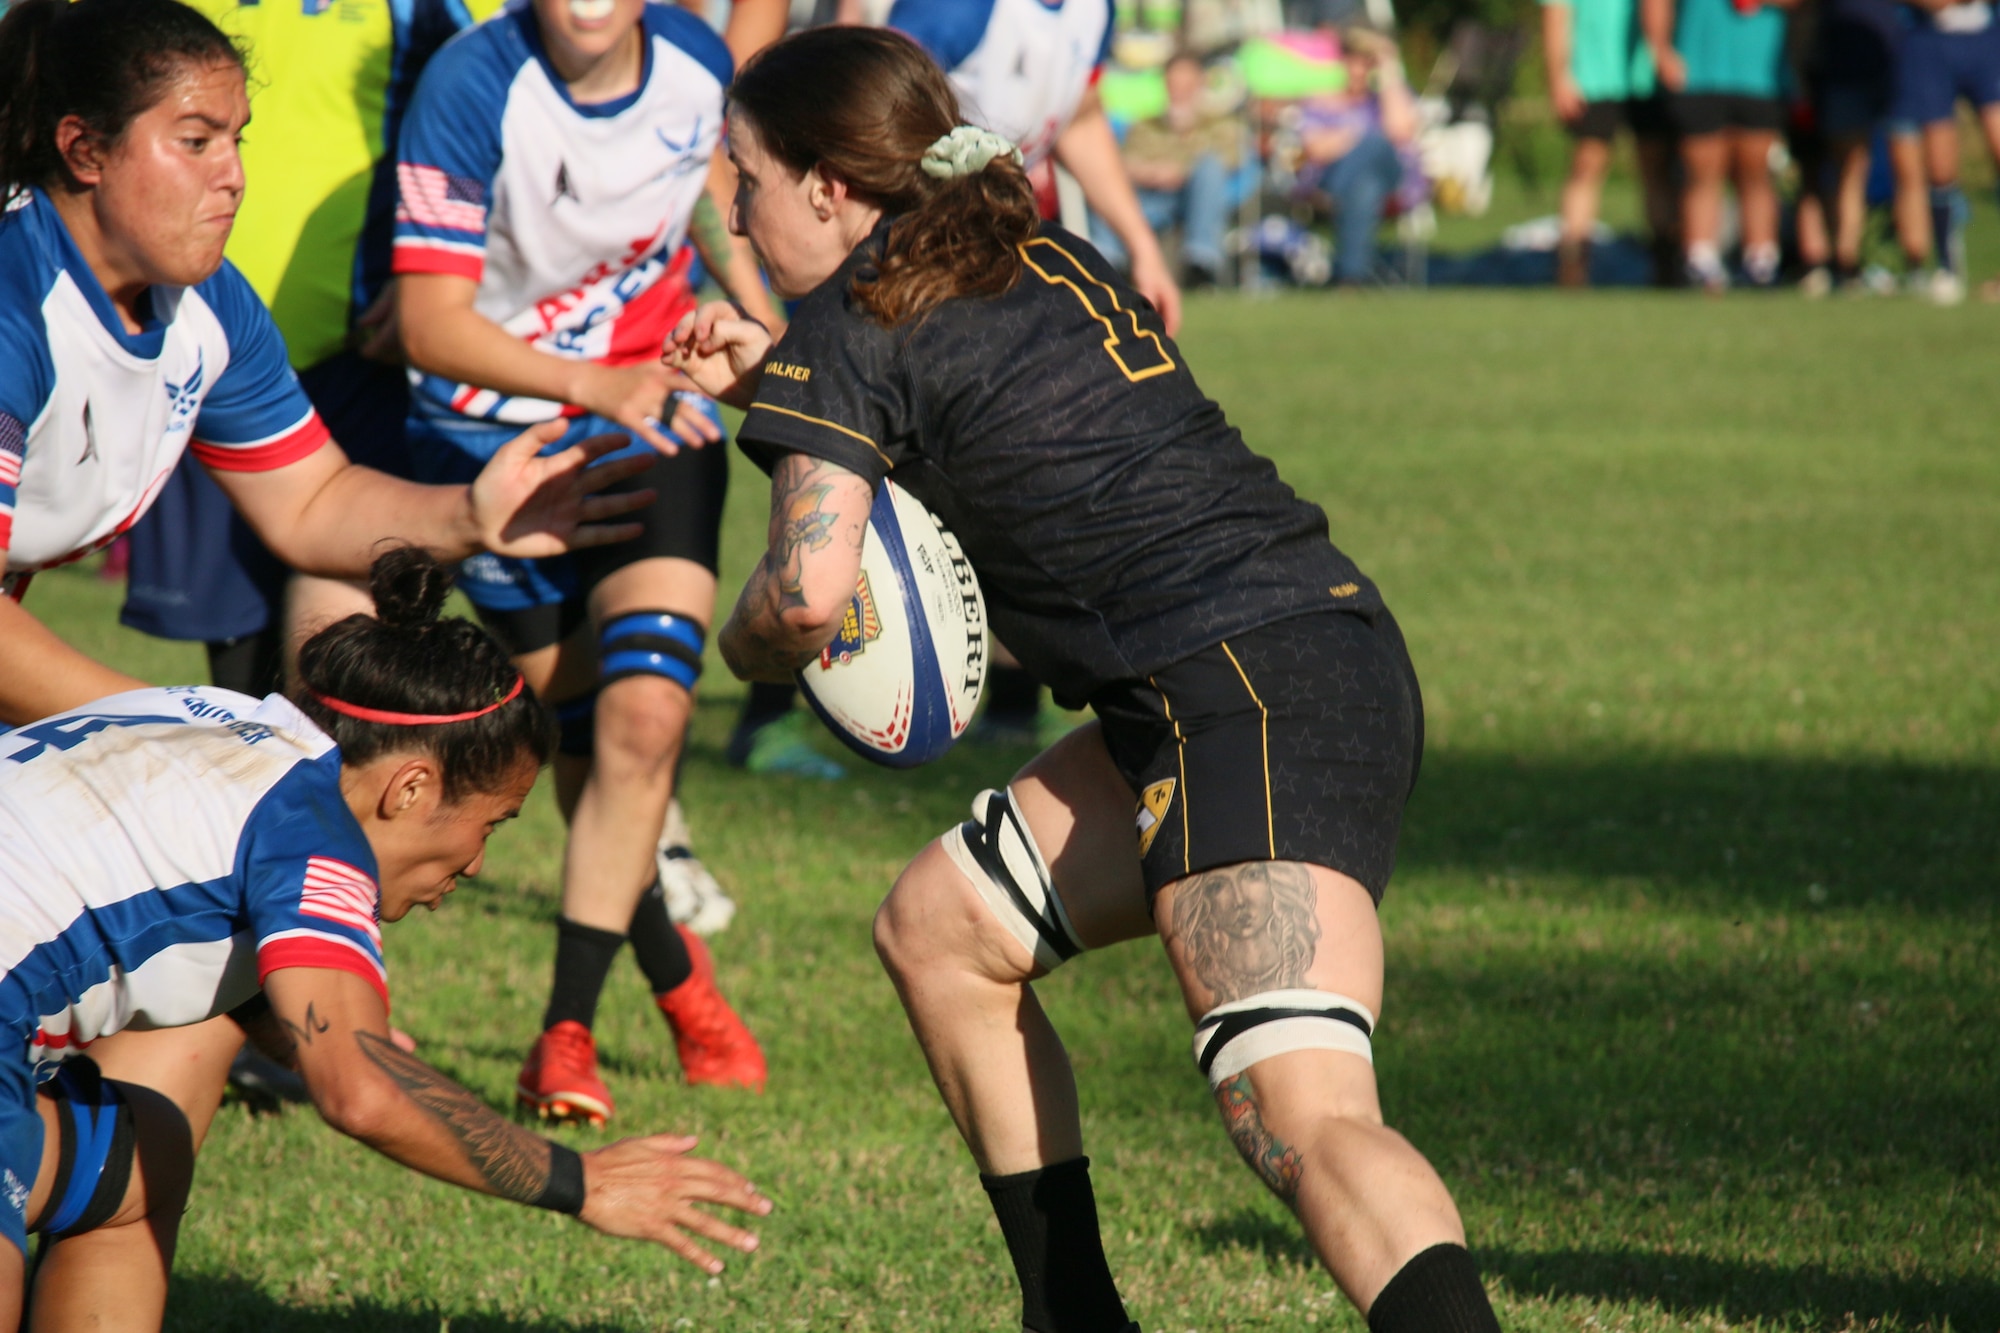 2023 Armed Forces Sports Women's Rugby Championship held in conjunction with the Cape Fear 7's Rugby Tournament